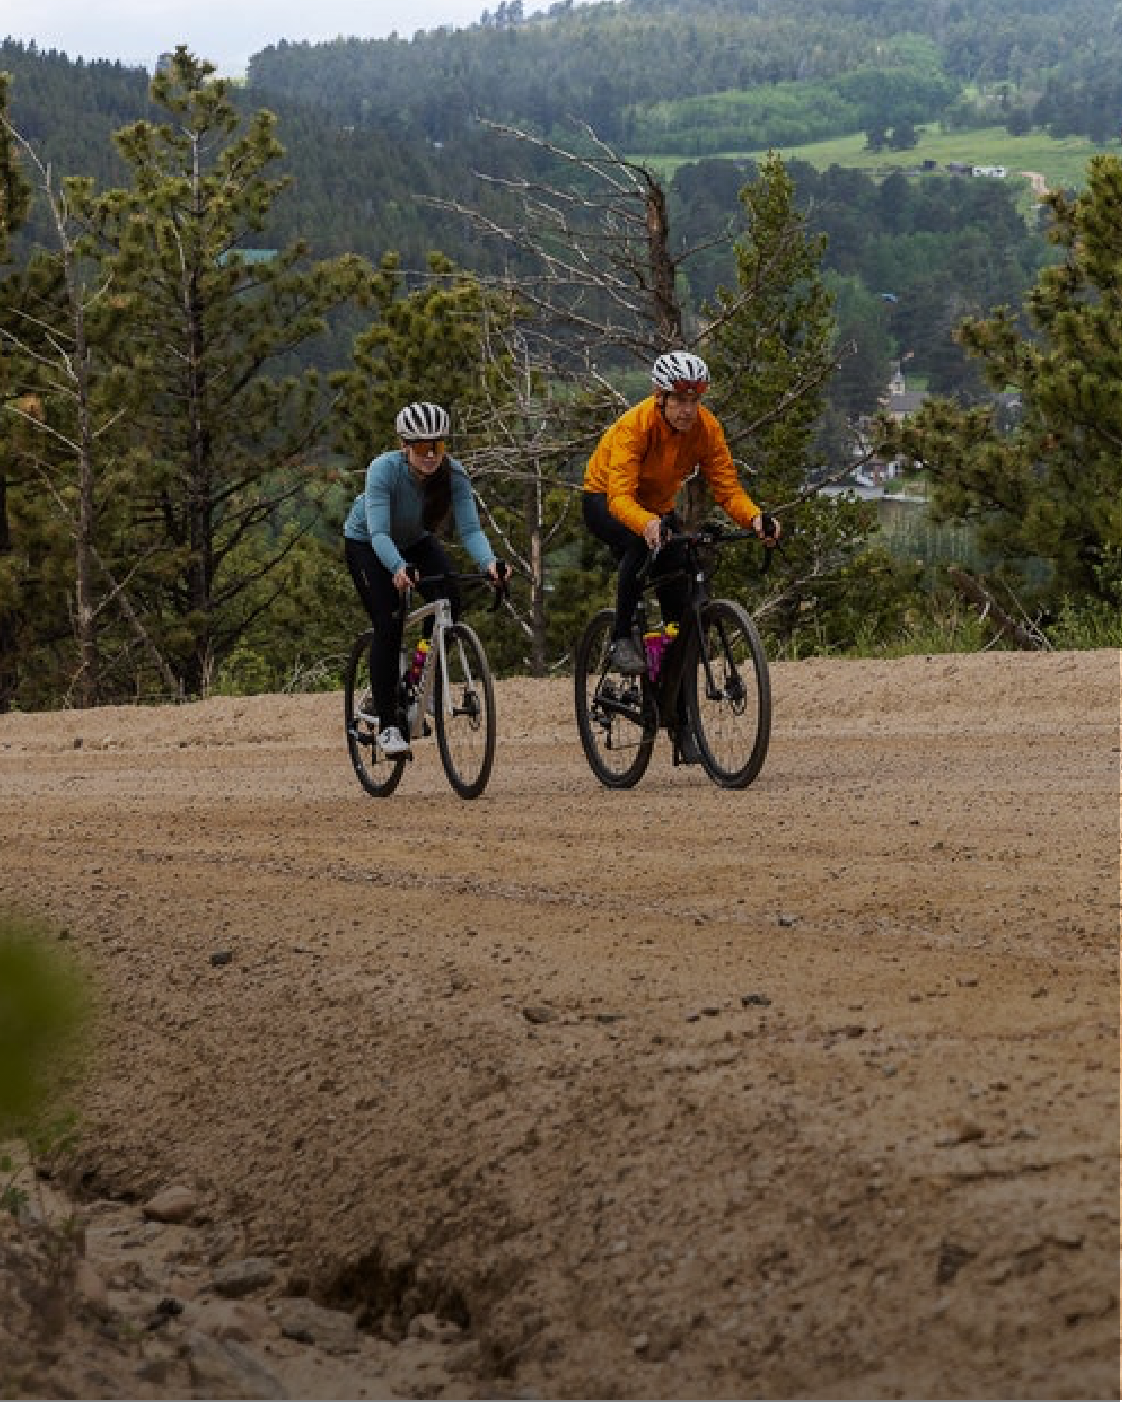 Male and female cyclists riding uphill on a gravel road wearing long sleeve PEARL iZUMi cycling gear.